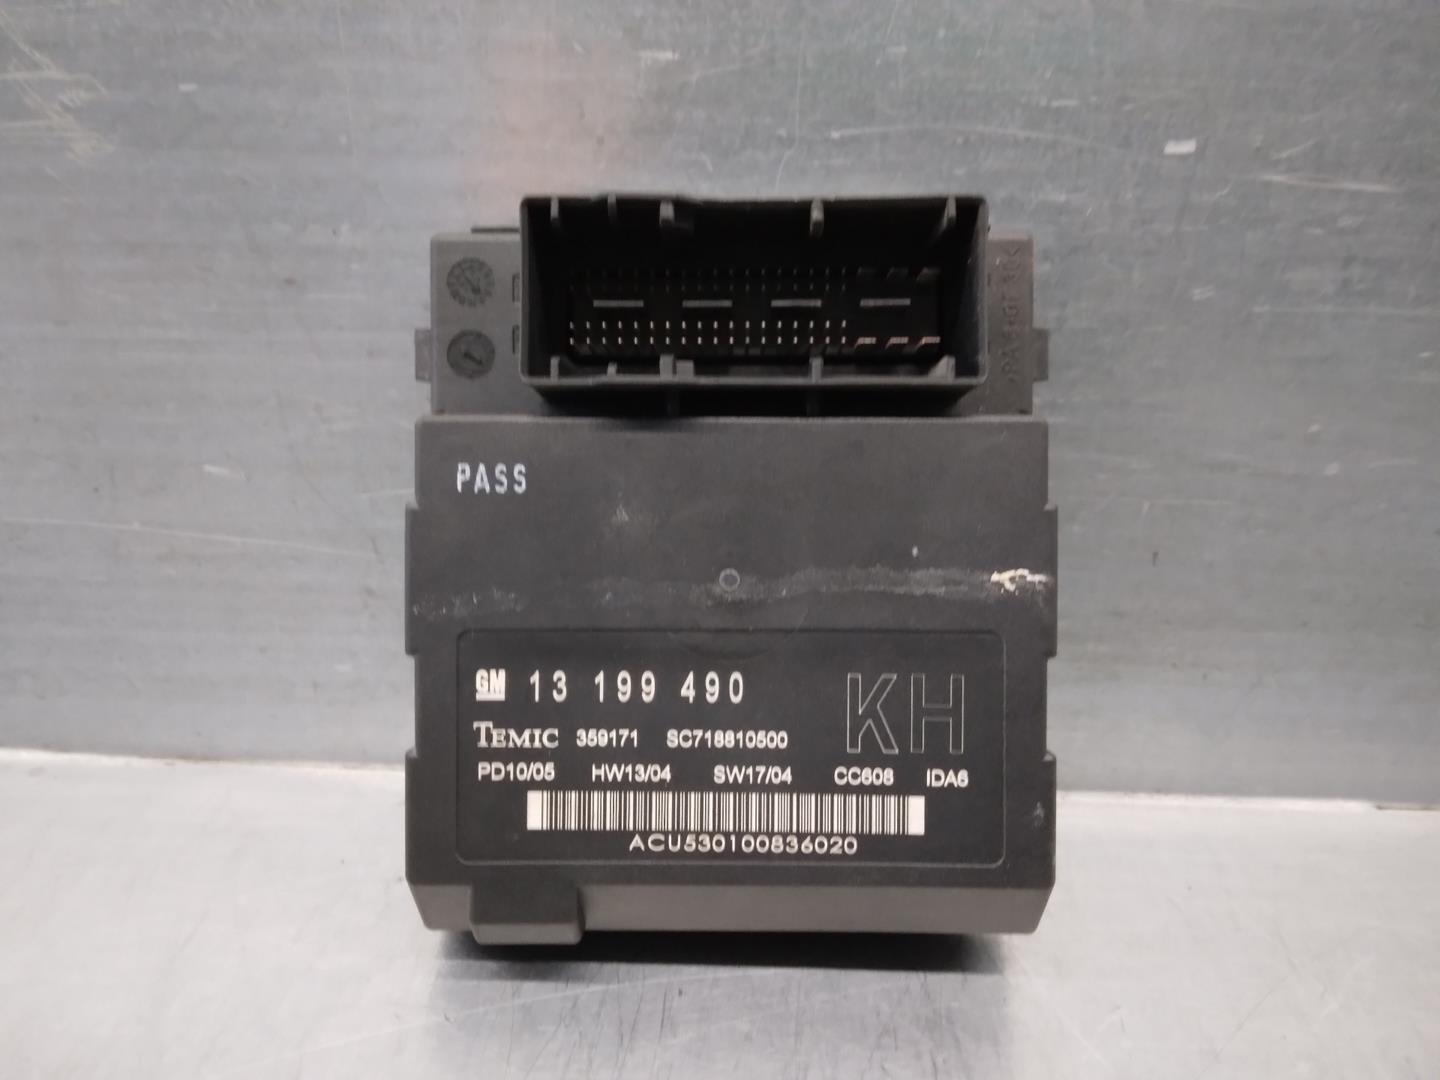 OPEL Vectra C (2002-2005) Other Control Units 13199490, 359171, TEMIC 21724050